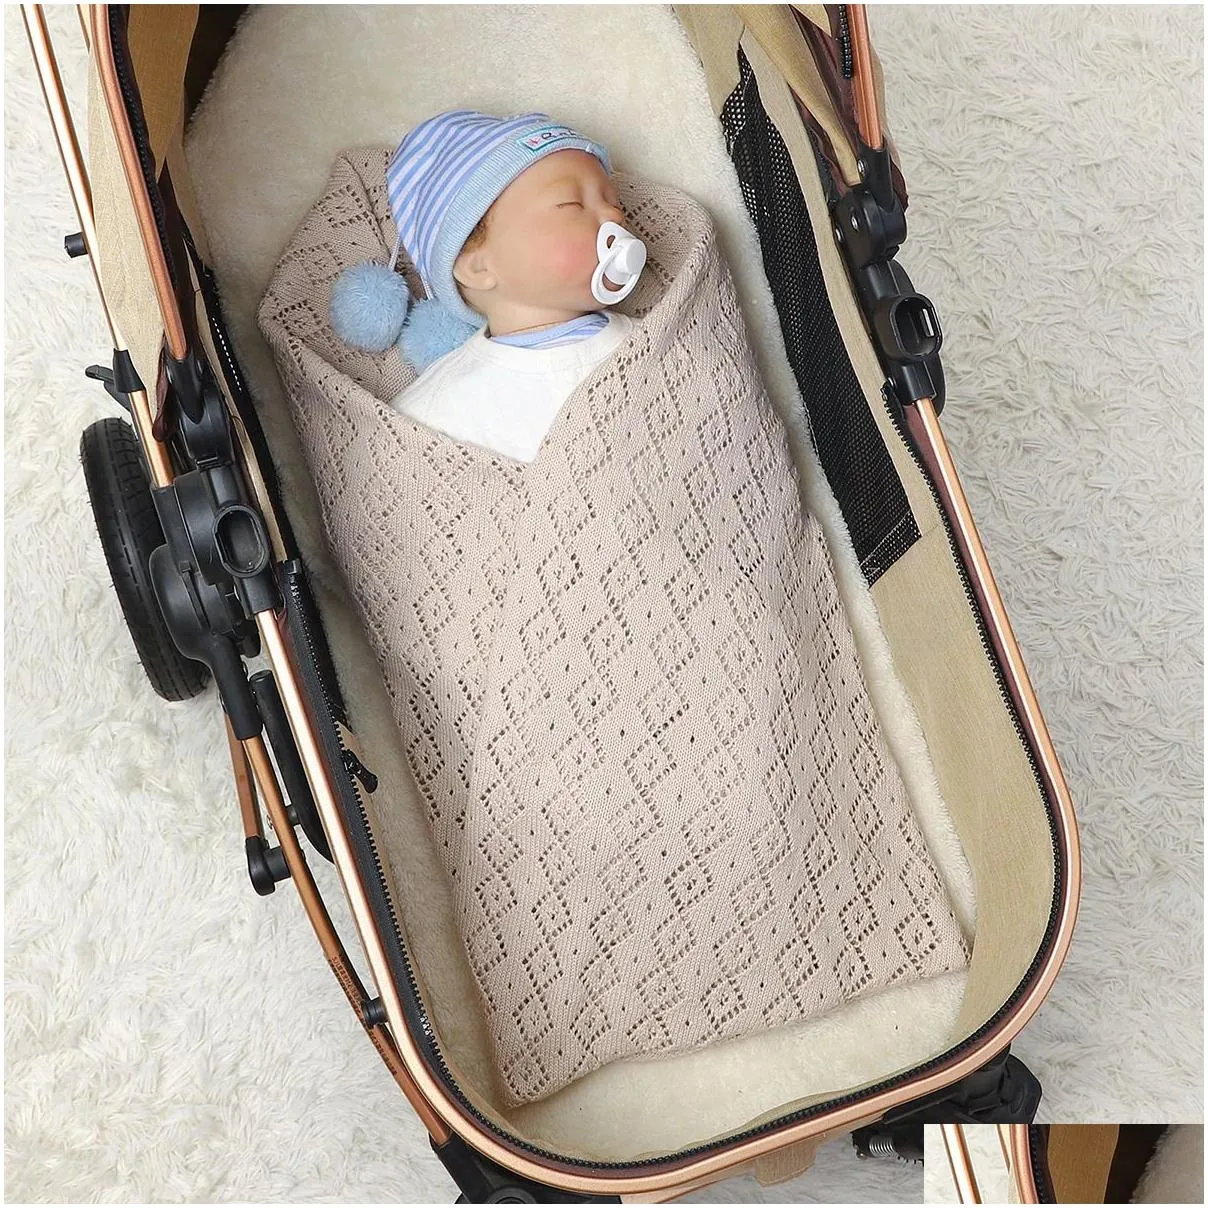 s Super Soft born Infant Boys Girls Cotton Knit Swaddle Wrap Sleep Mats 9070cm Toddler Outdoor Throw Crib Quilts 240322